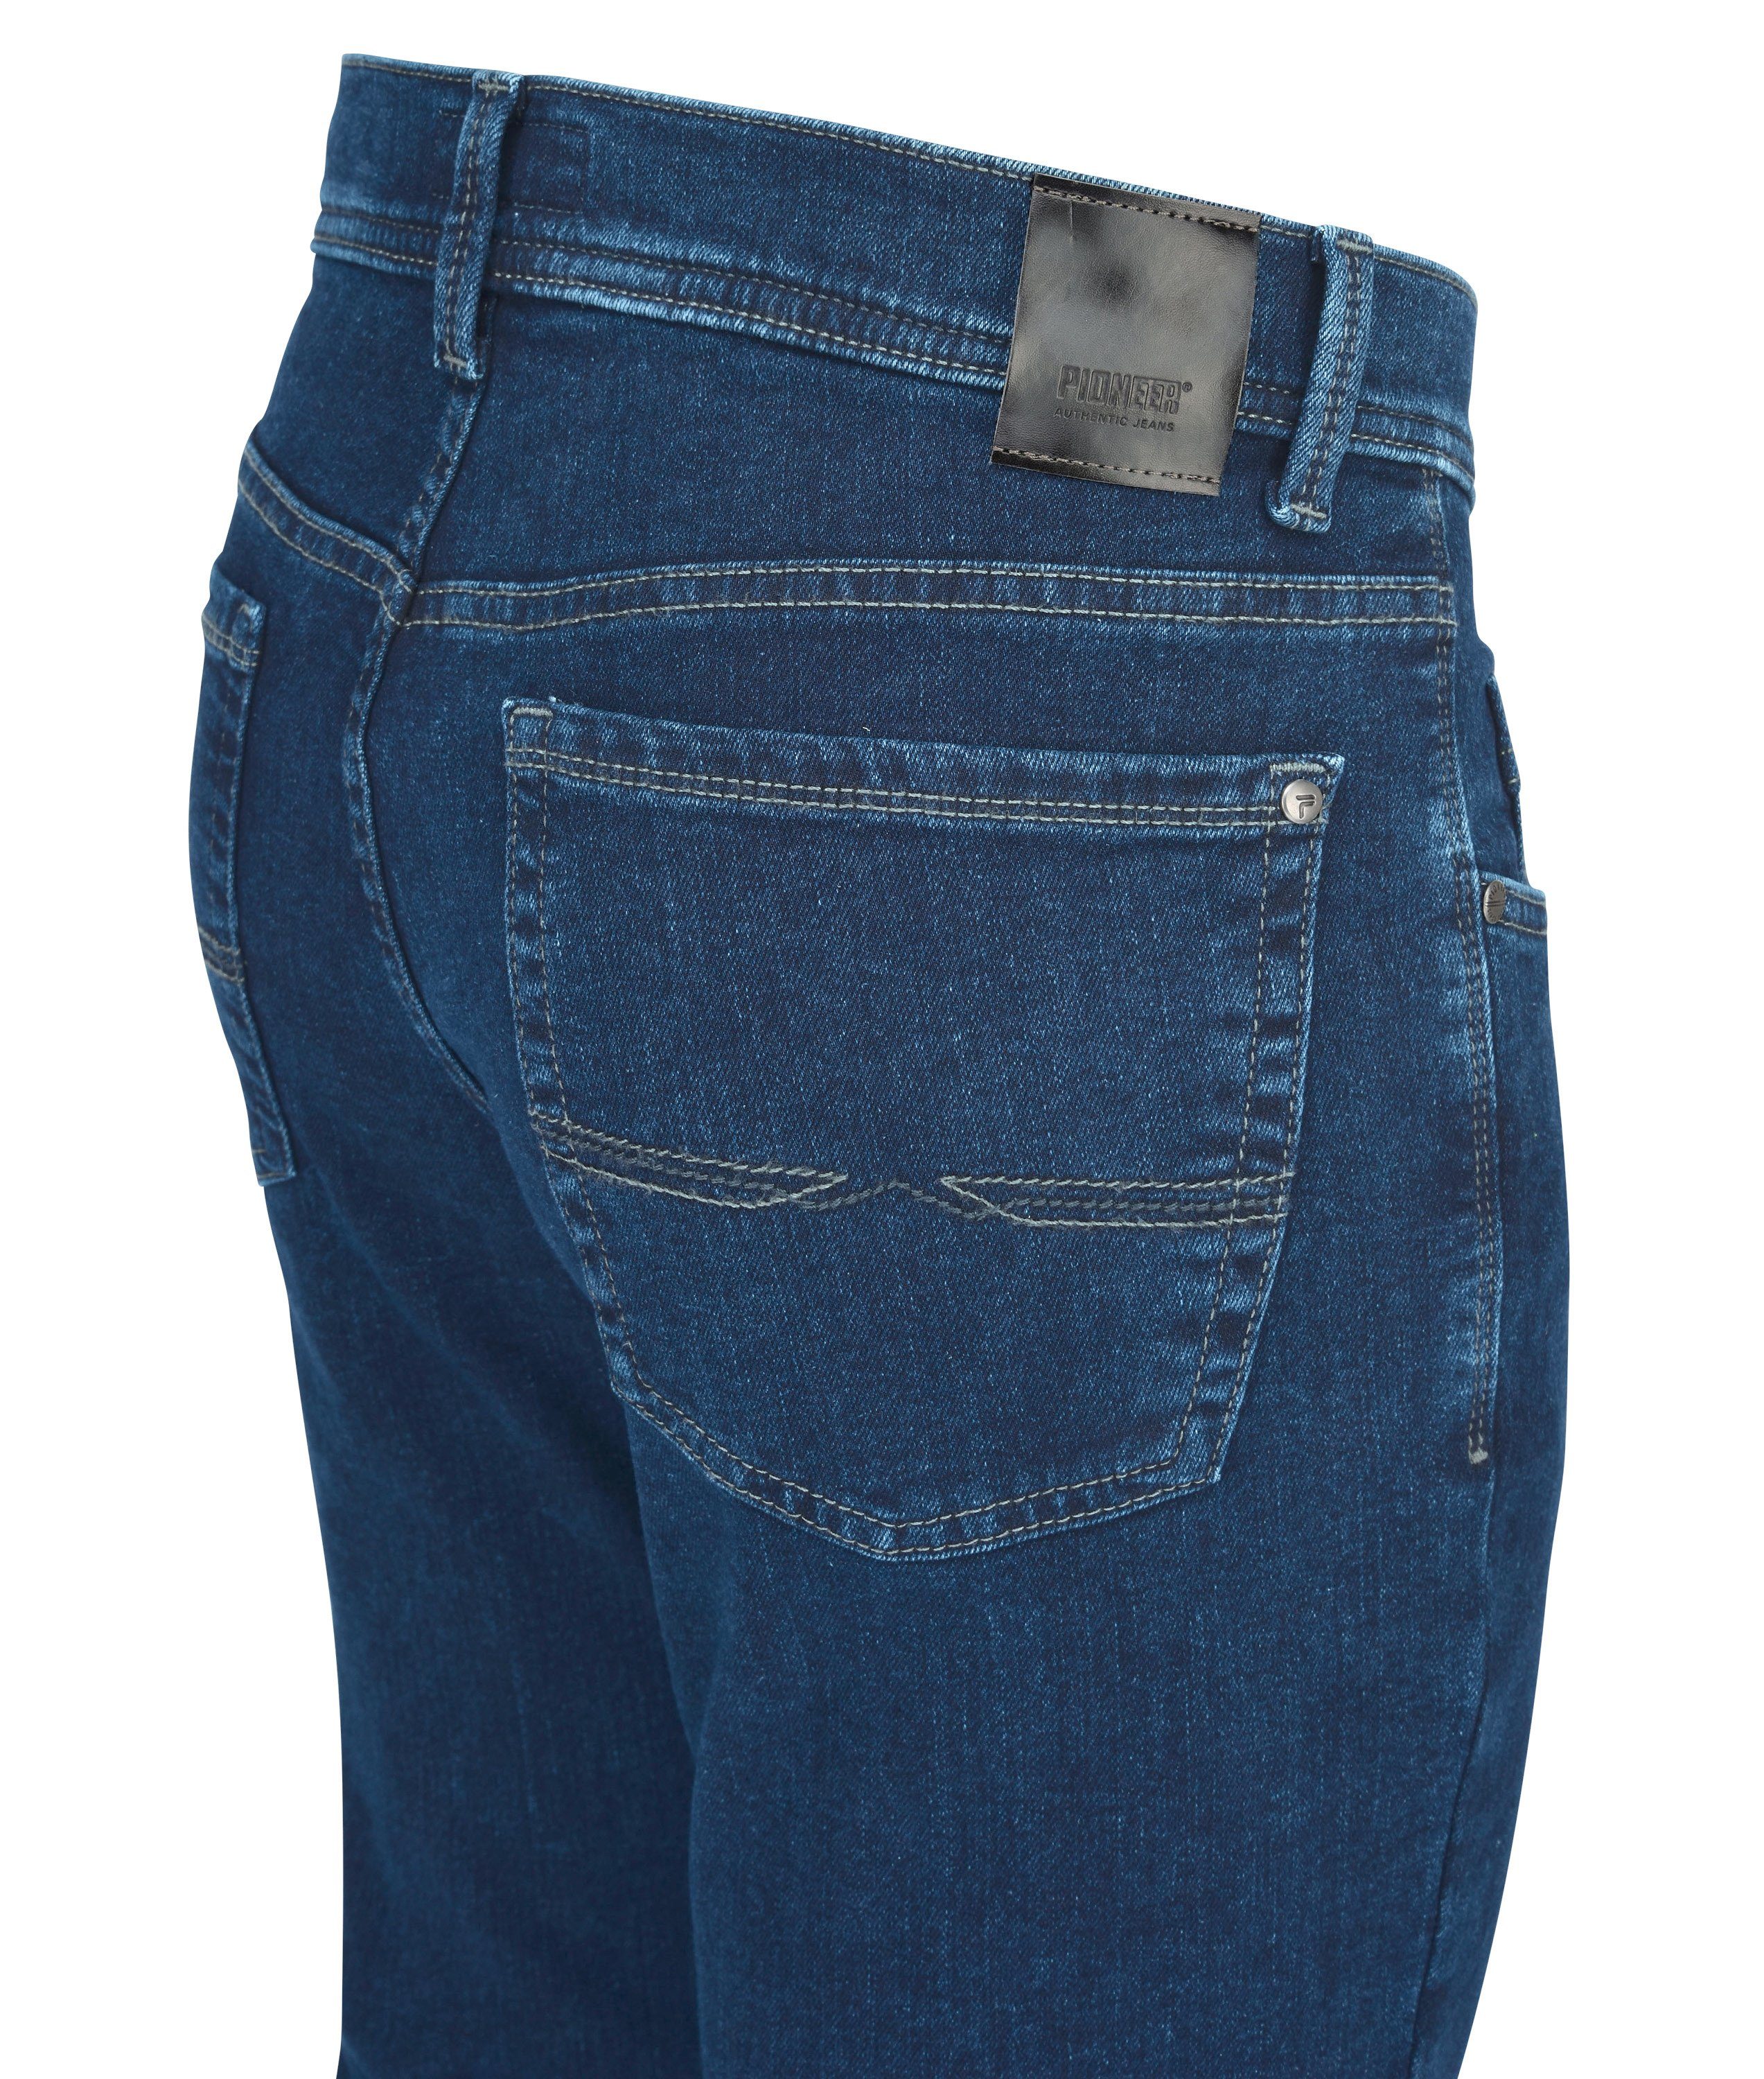 Pioneer Authentic RANDO THERMO 1680 PIONEER 5-Pocket-Jeans denim - blue Jeans 9504.05